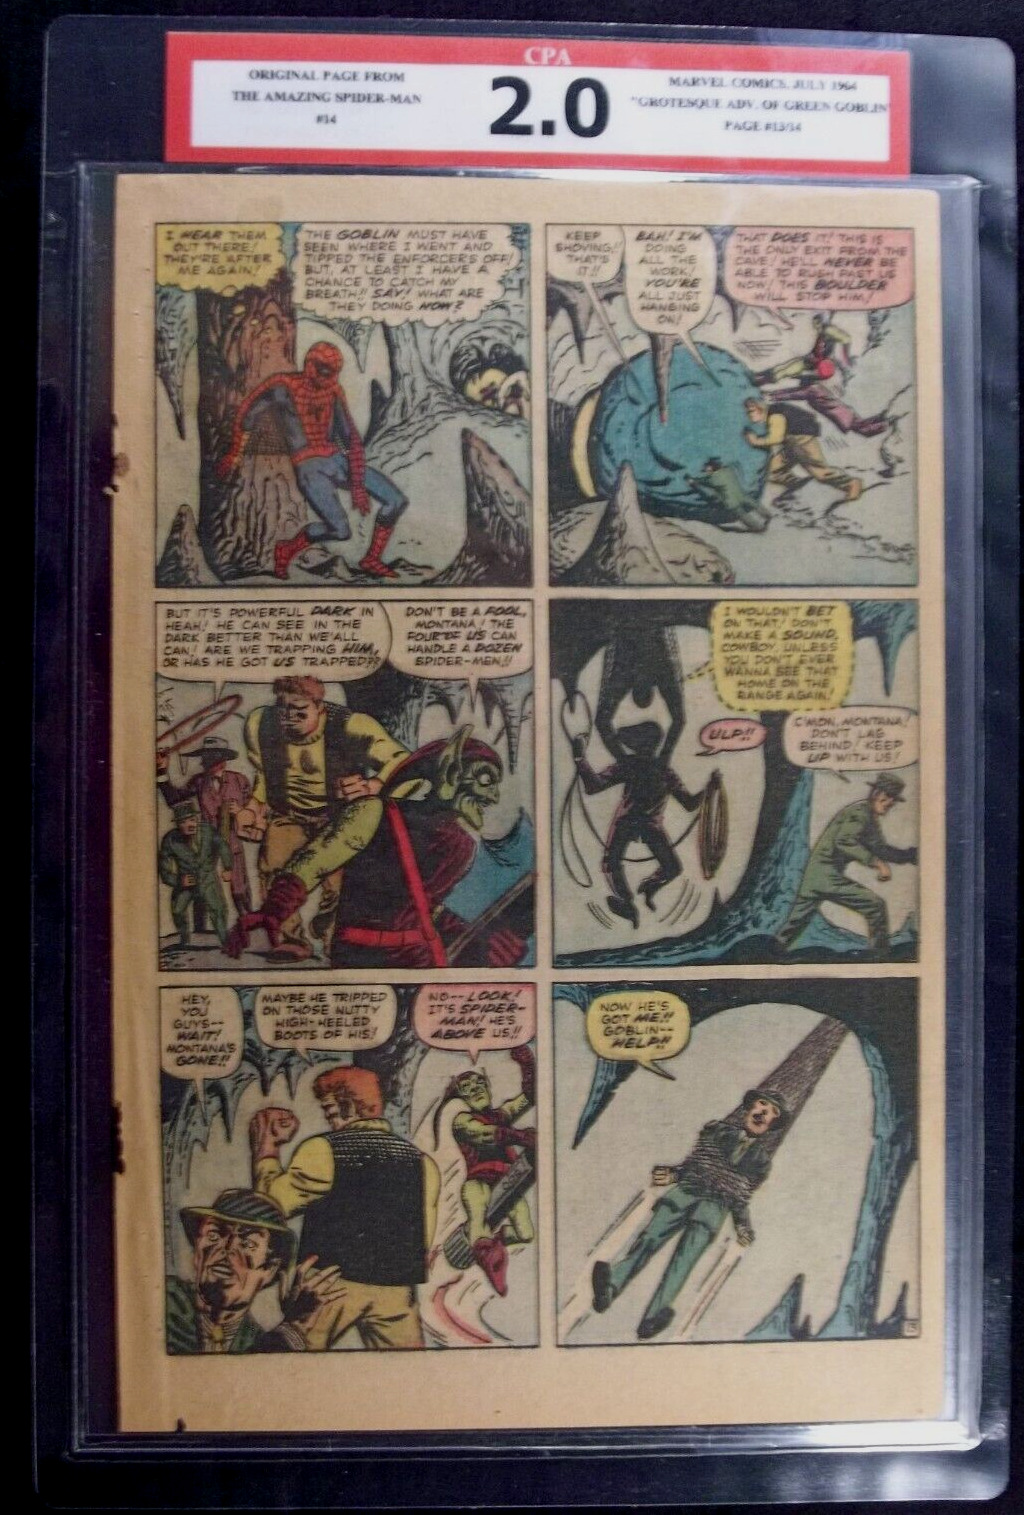 Amazing Spider-man #14 CPA 2.0 SINGLE PAGE #13/14 1st app. The Green Goblin